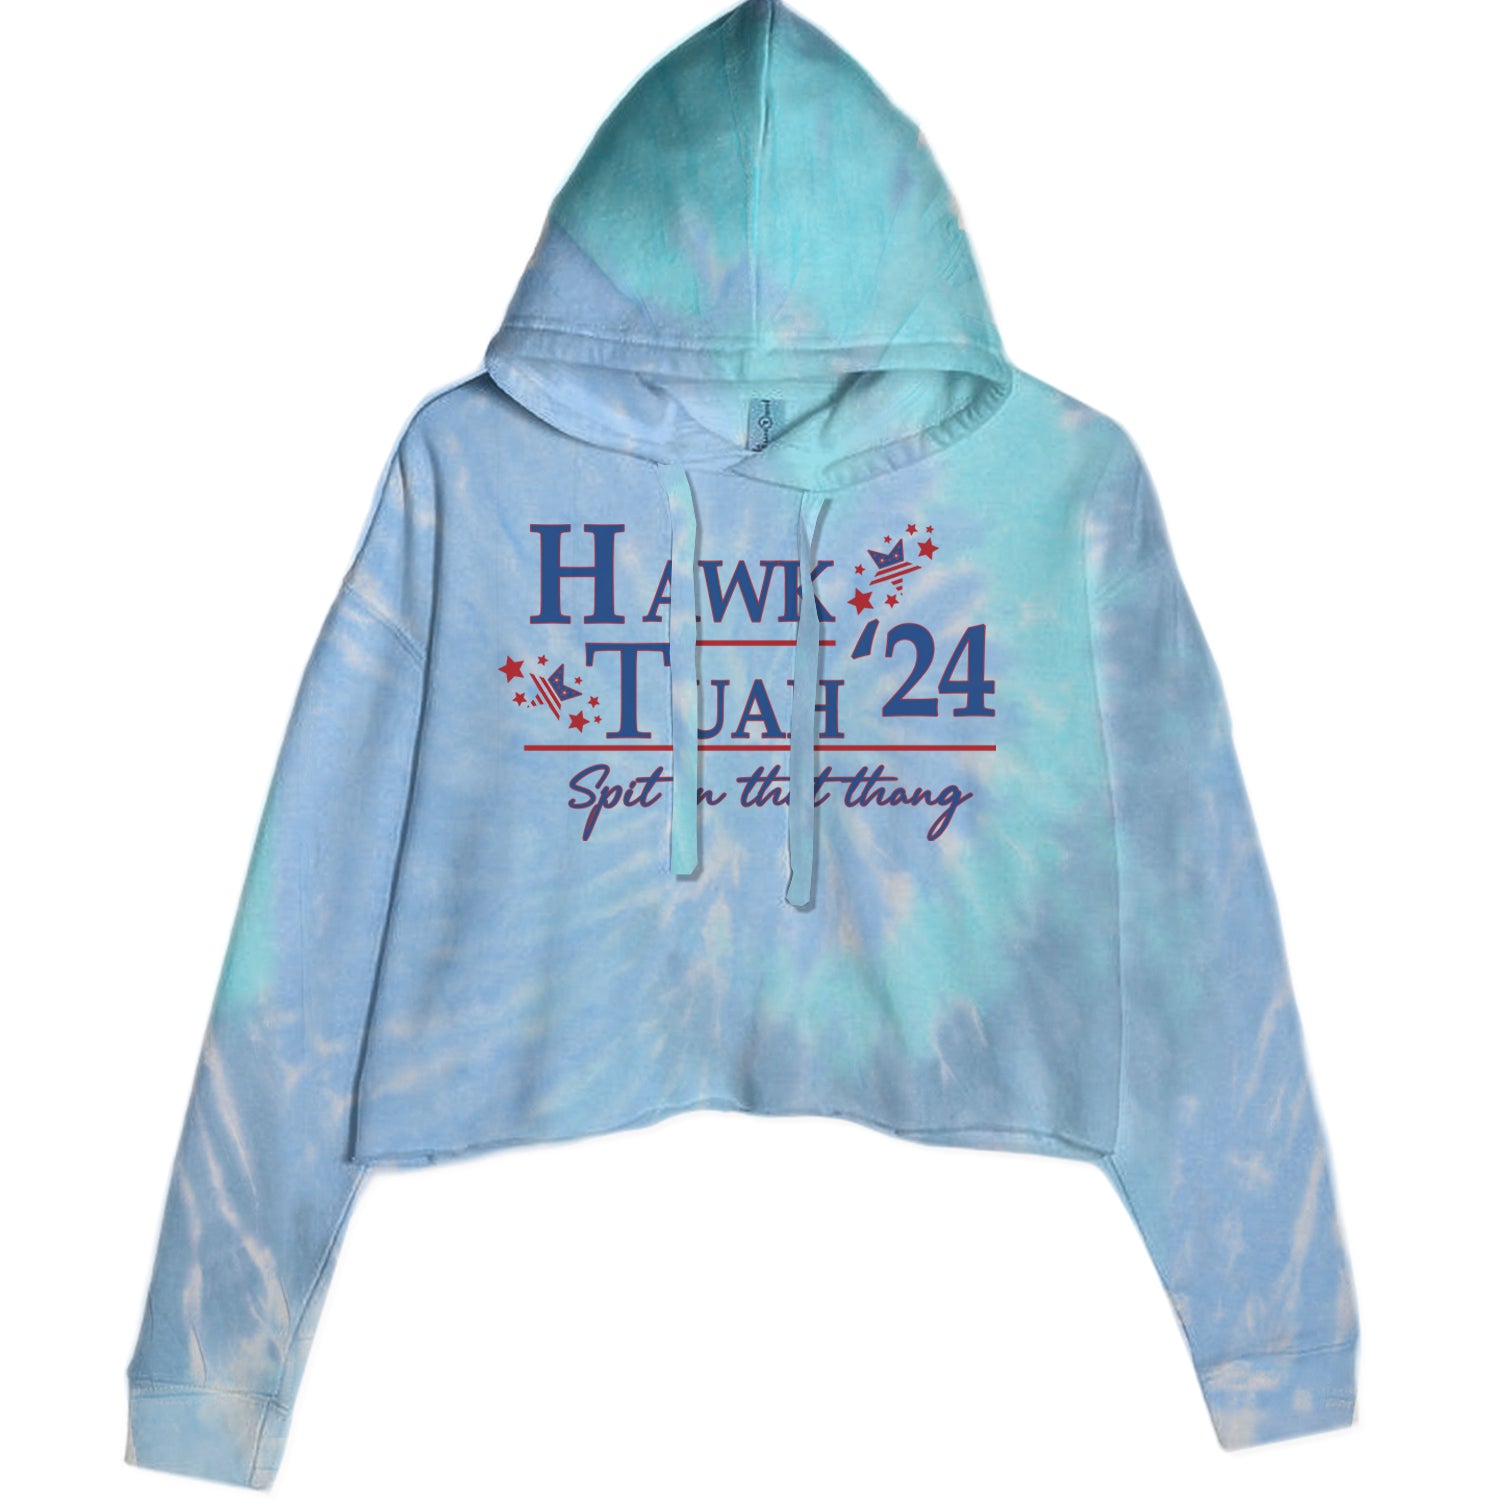 Vote For Hawk Tuah Spit On That Thang 2024 Cropped Hoodie Sweatshirt Blue Clouds